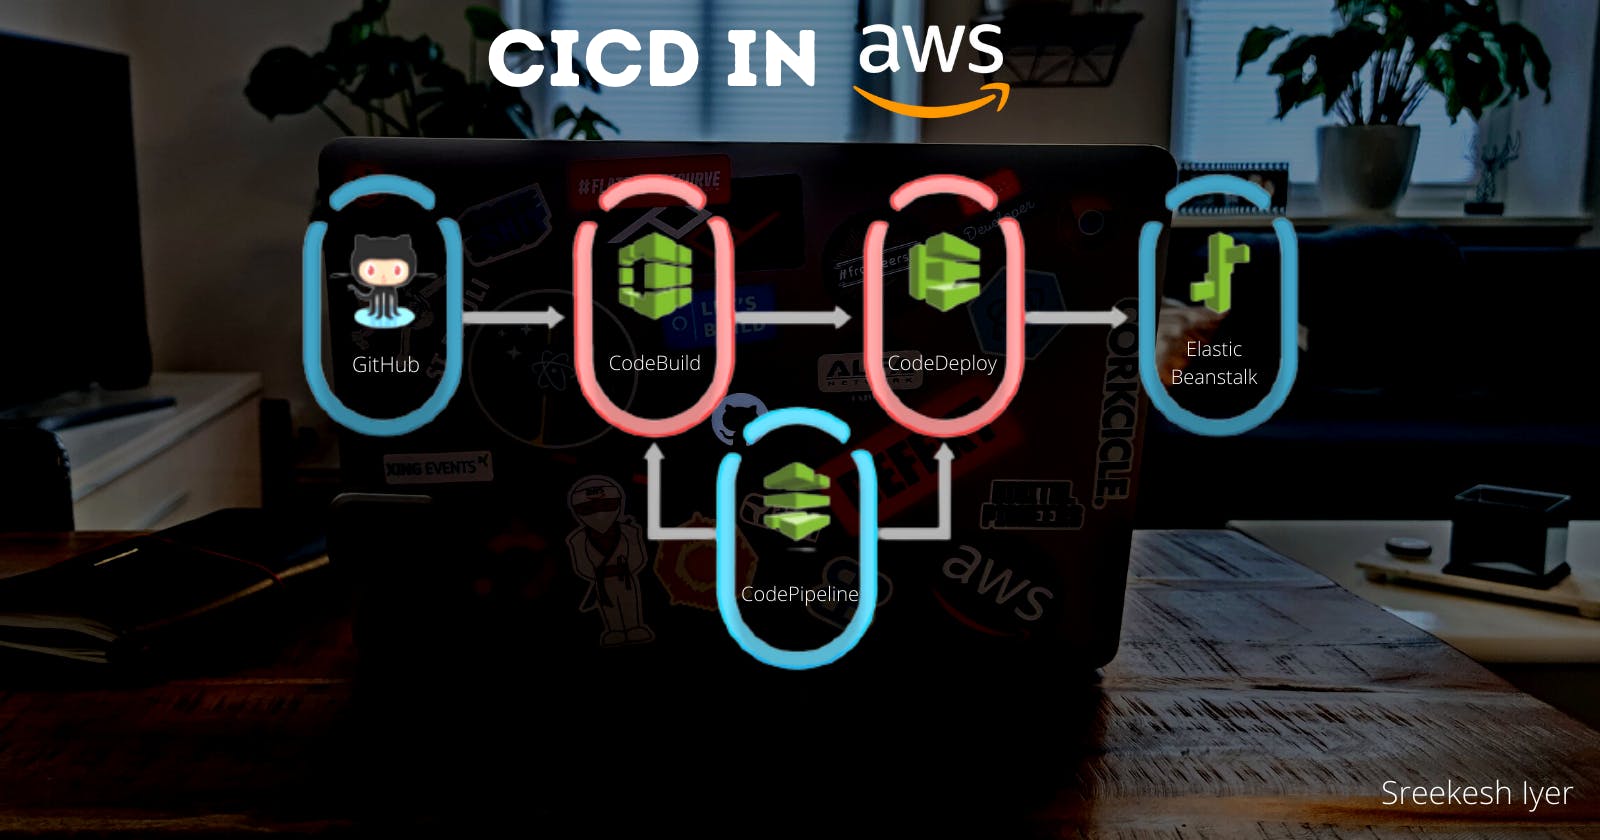 CICD in AWS using CodePipeline and EBS